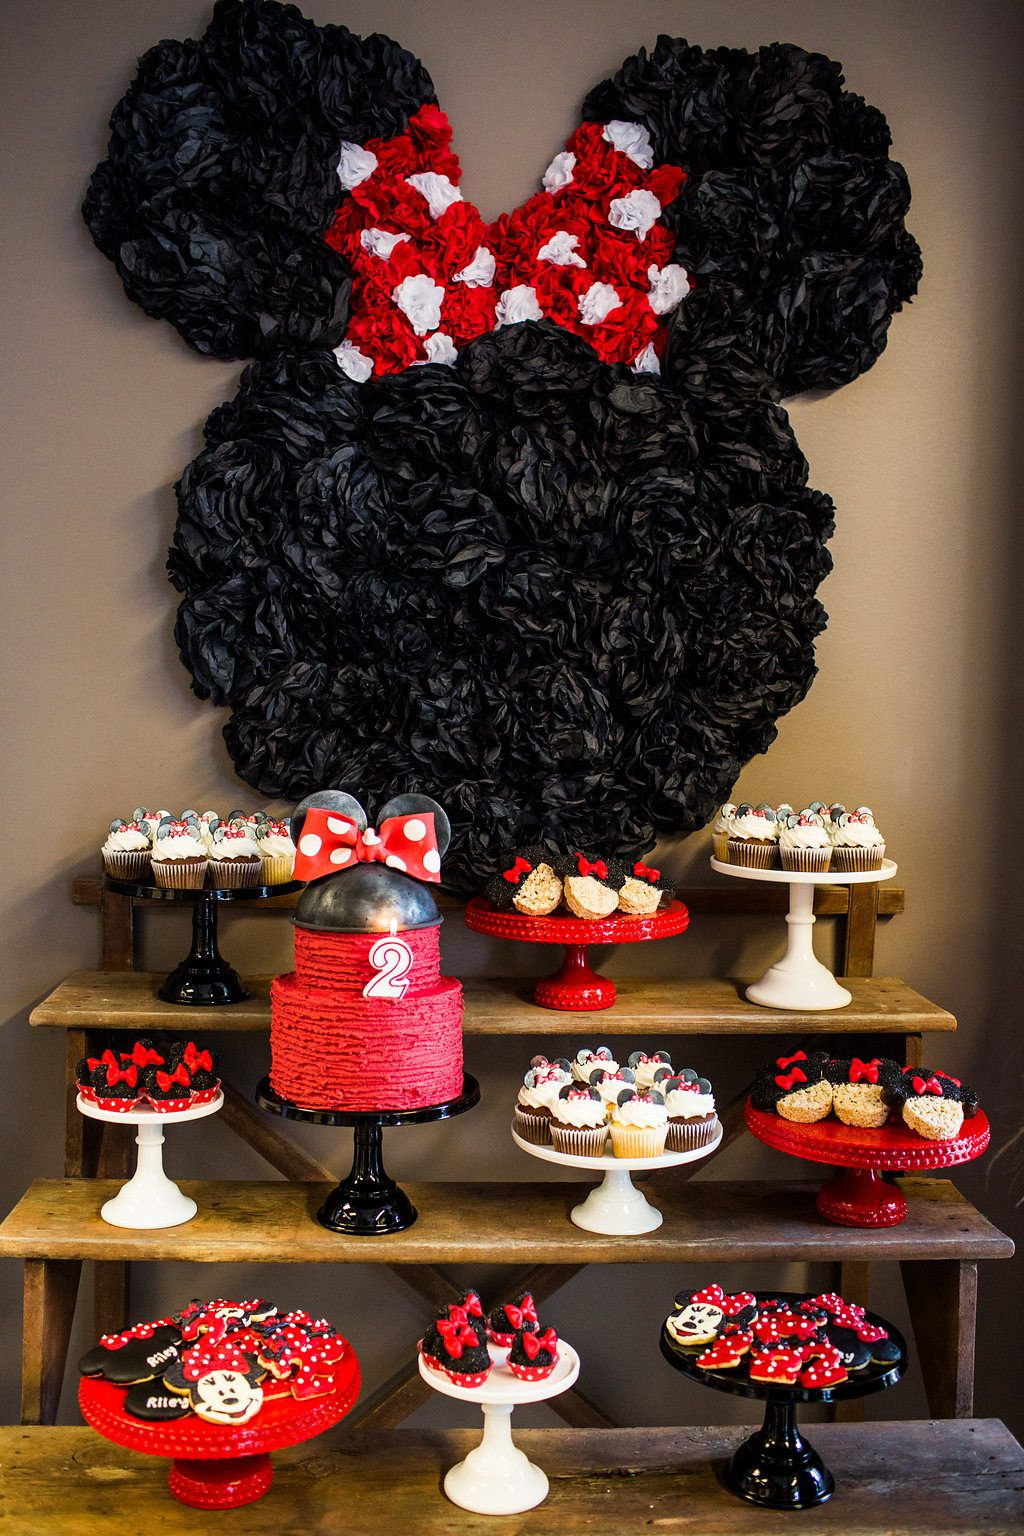 Minnie Birthday Decorations
 Top 10 Minnie Mouse Birthday Party Ideas by Lindi Haws of